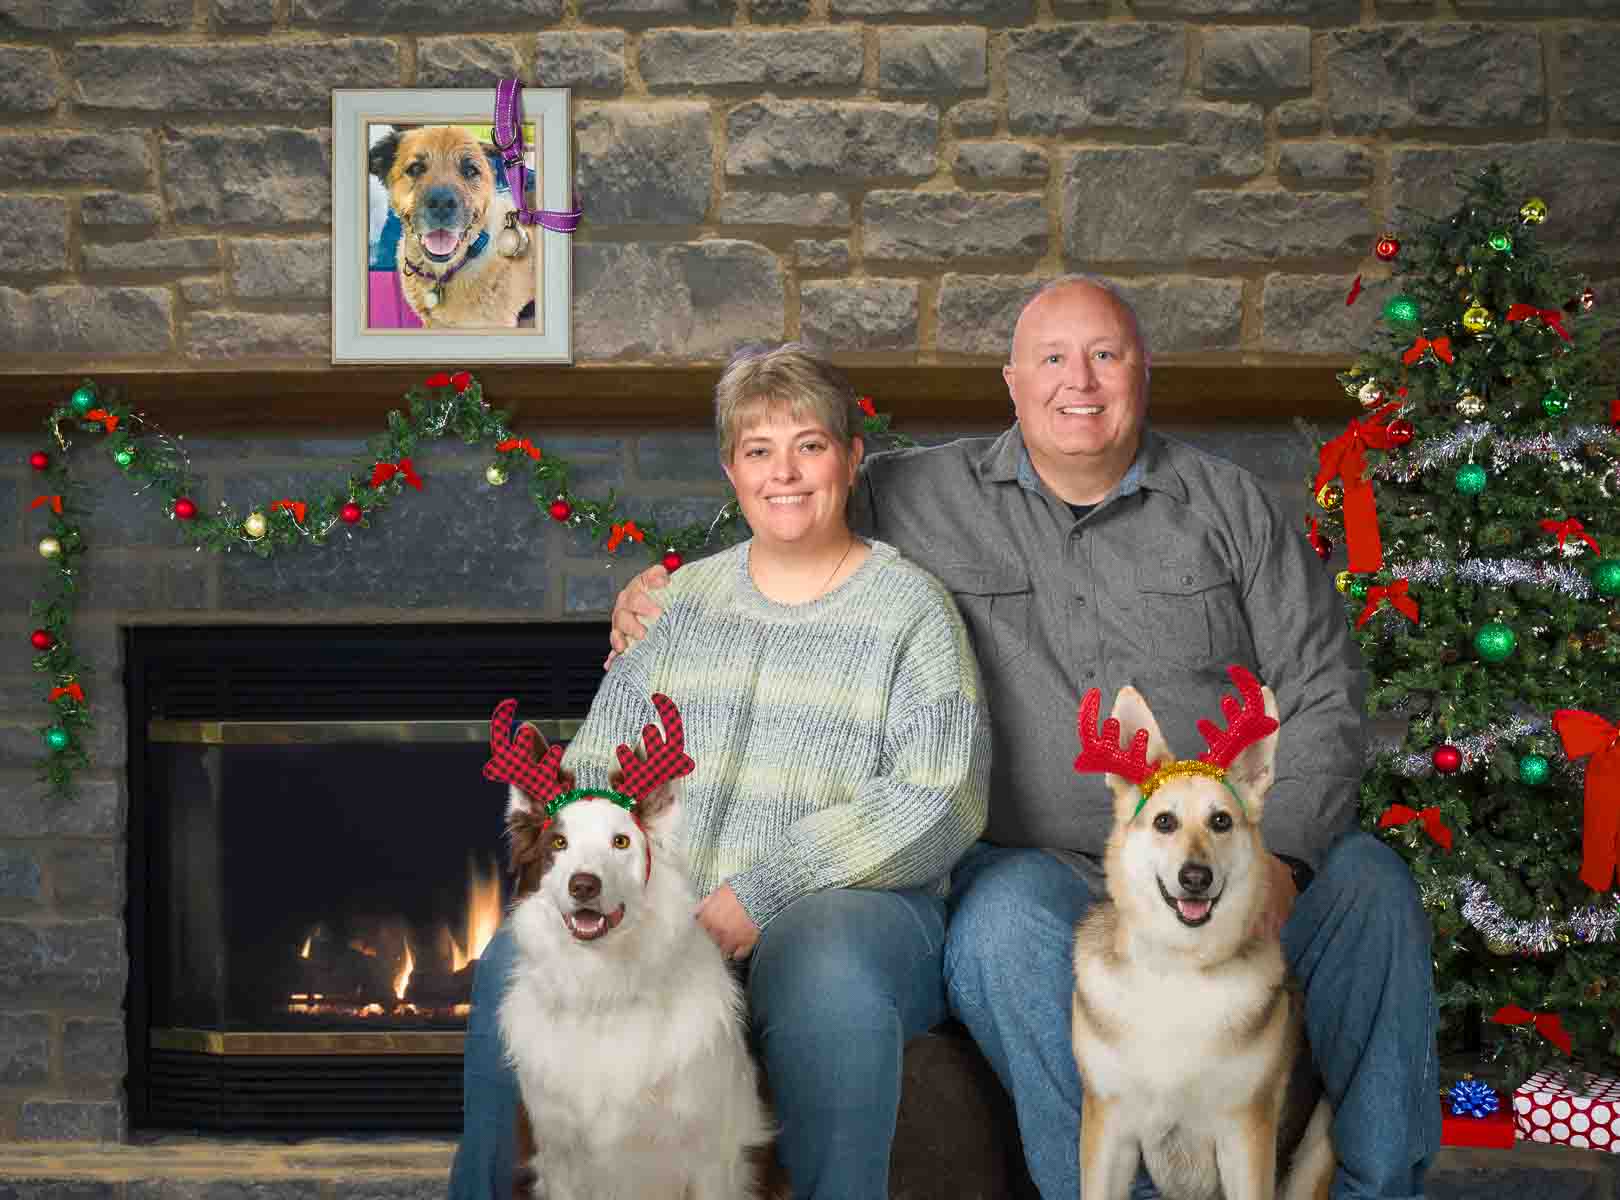 A man and woman sitting on the couch with two dogs.